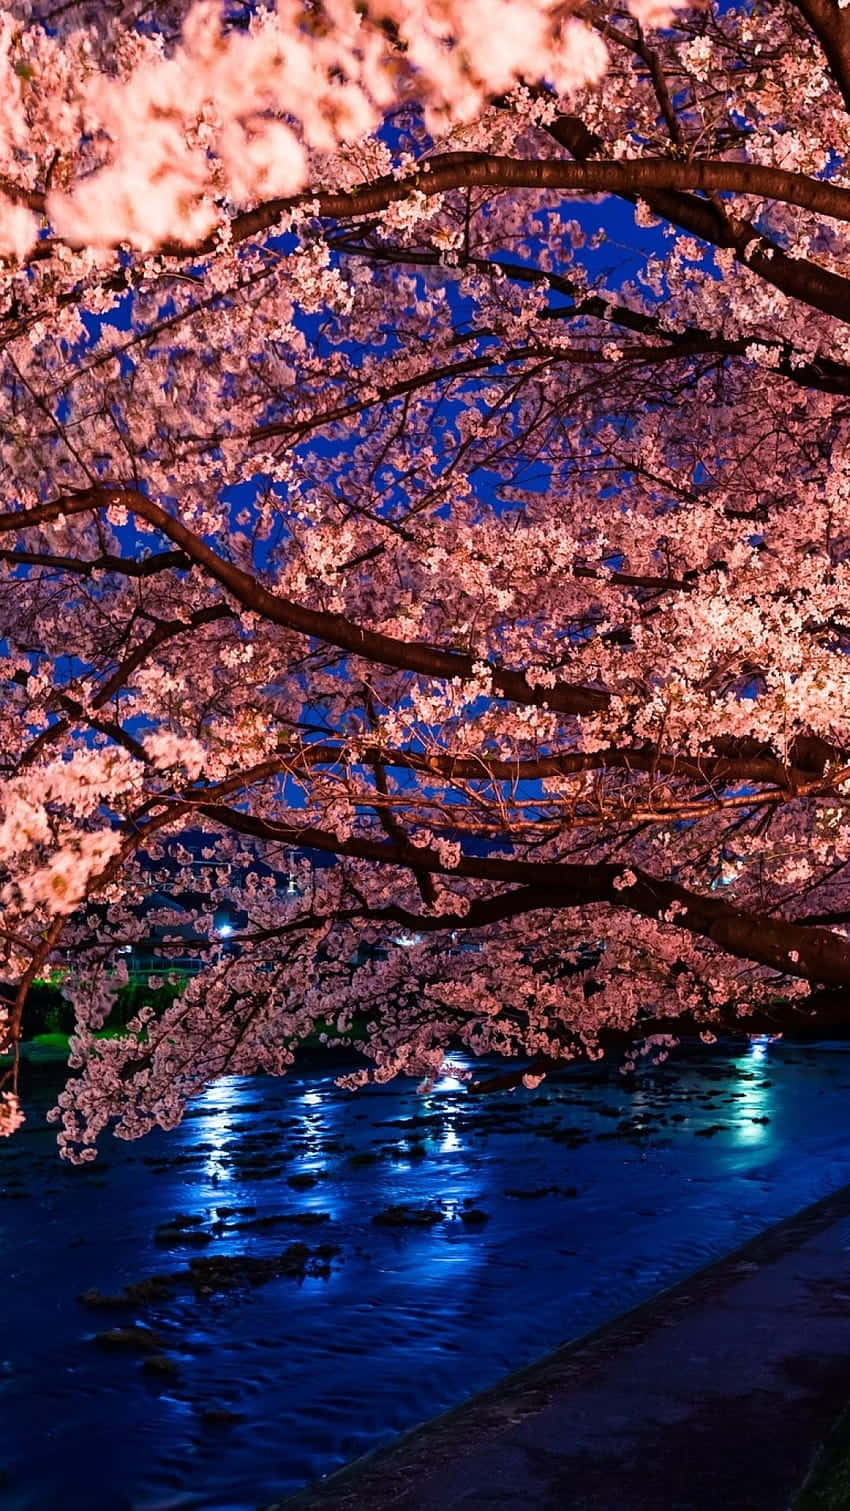 Gaze upon a dreamy starry night sky shimmering through a blooming cherry blossom tree. Wallpaper